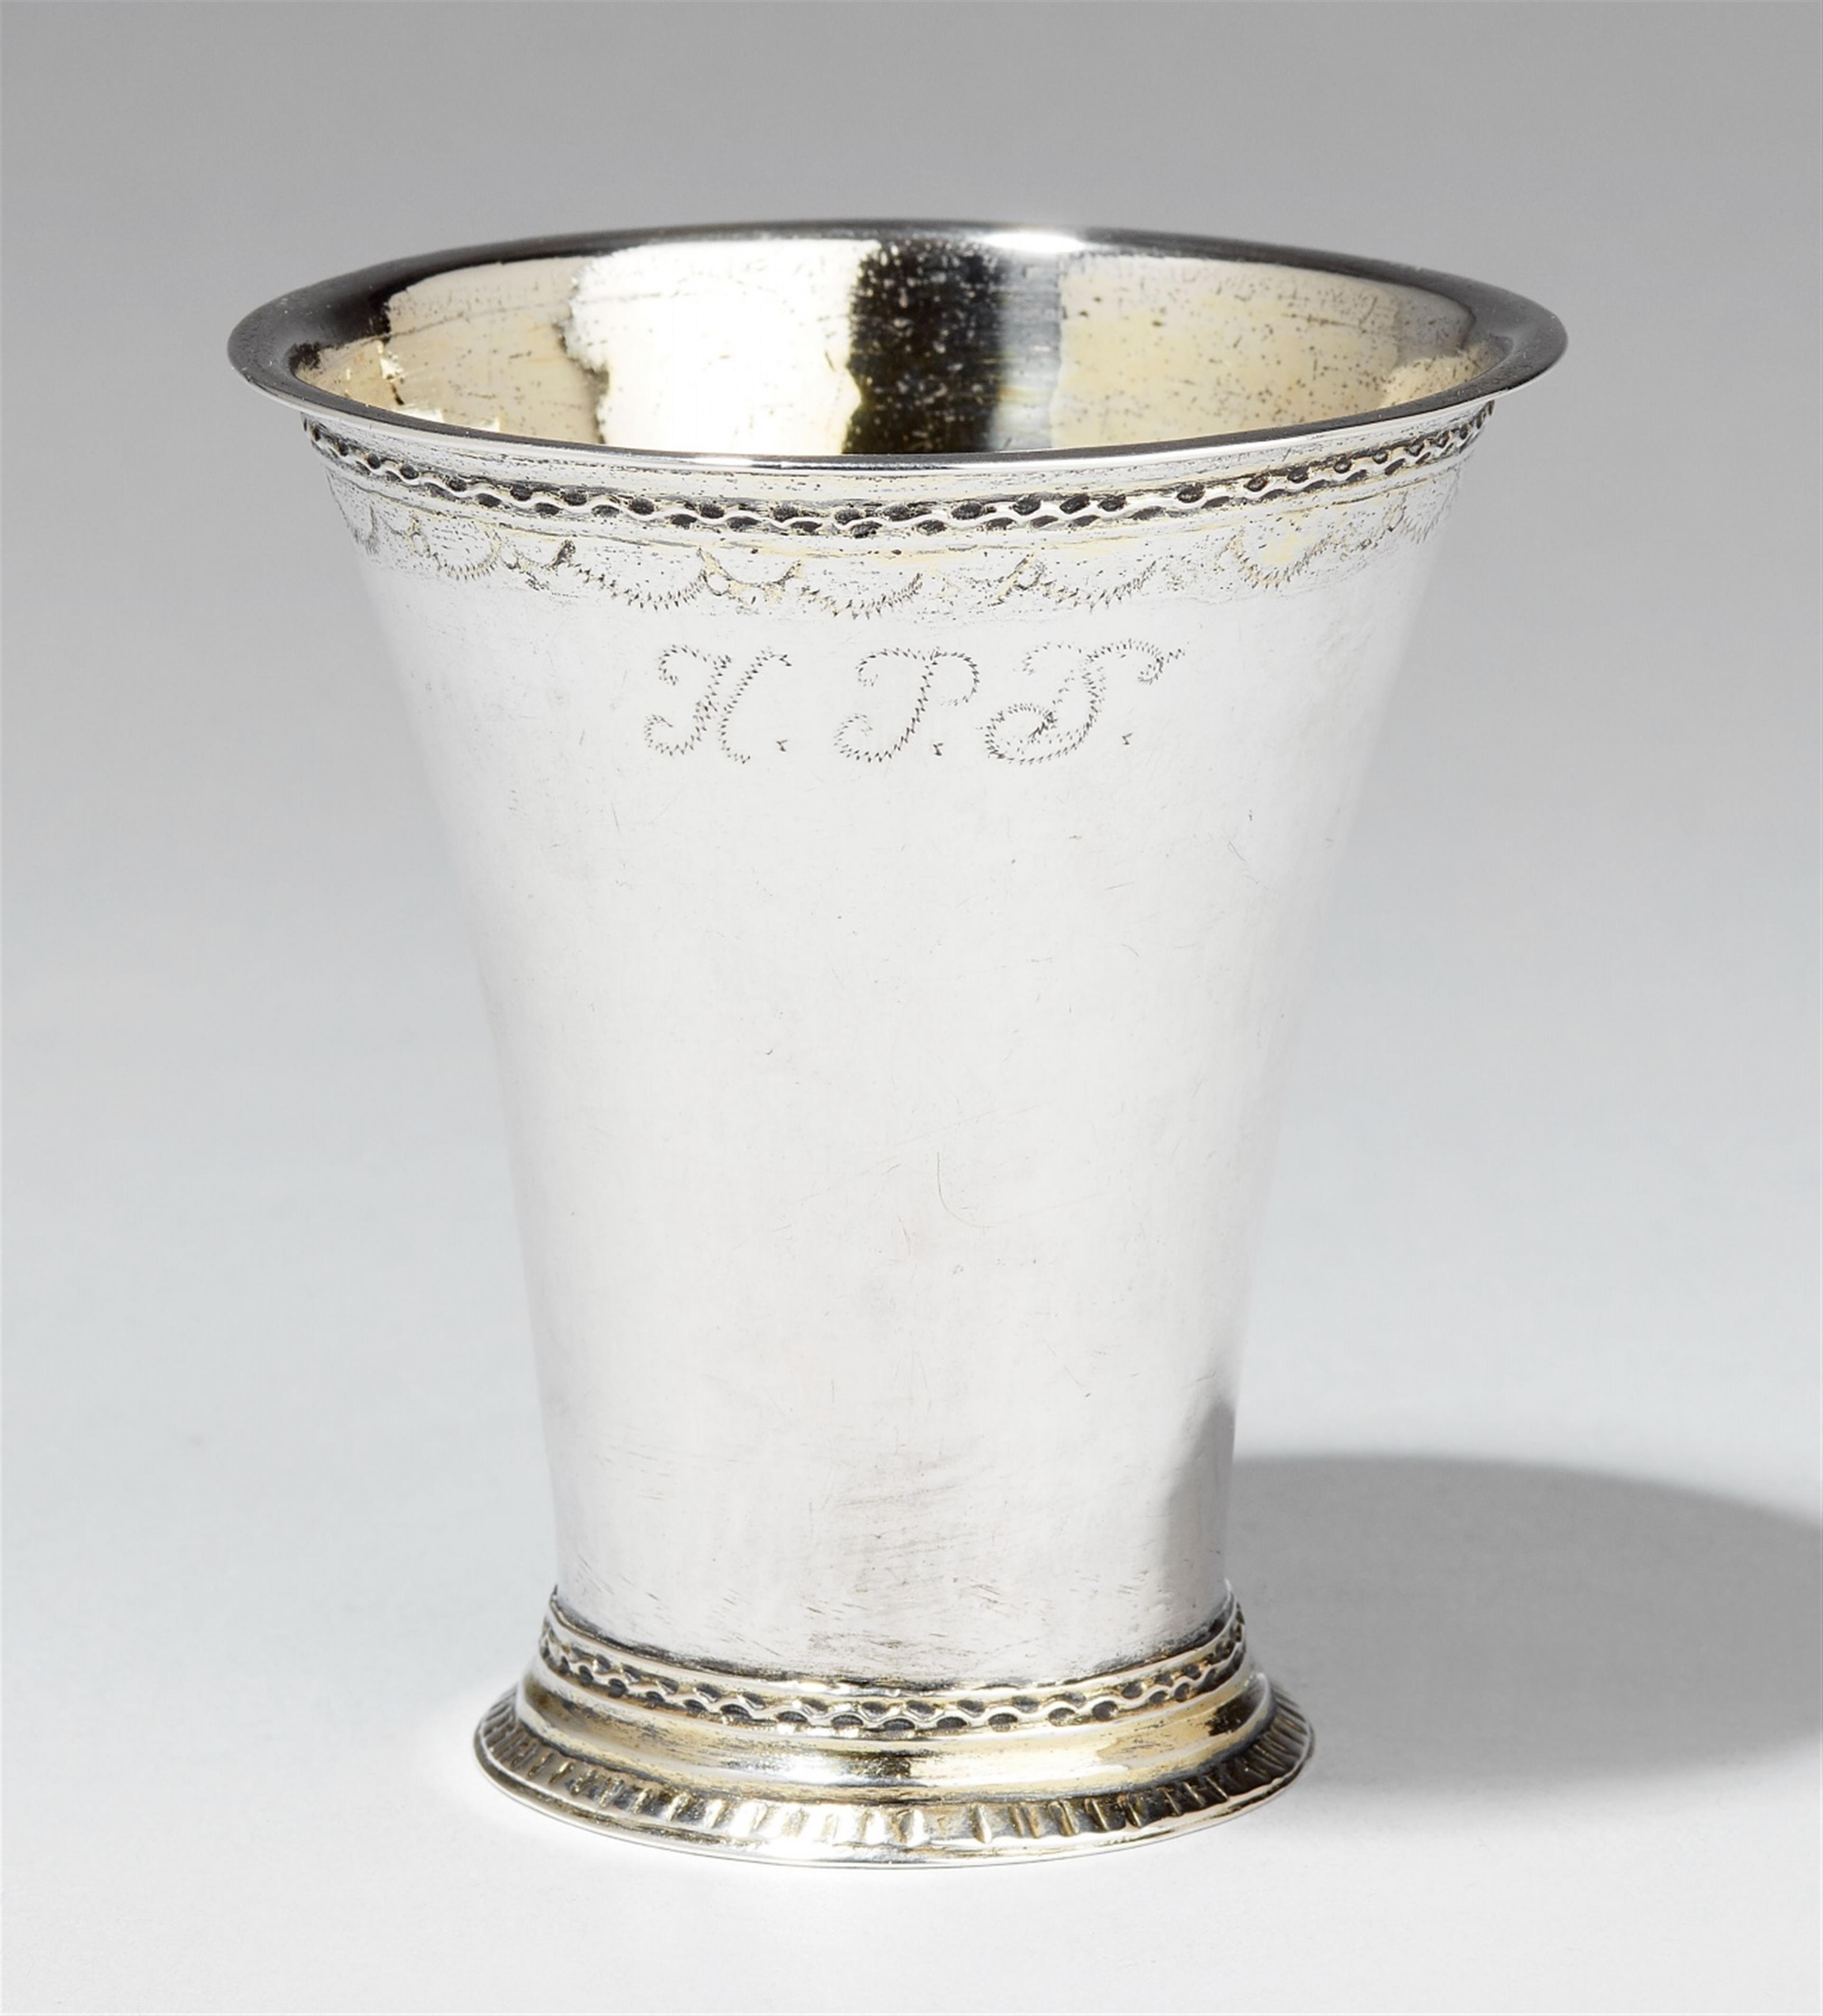 A Stockholm silver beaker. Monogram "H.P.D" ammended to "H.P.S". Marks of Anders Lundman, 1745 - 58. - image-1